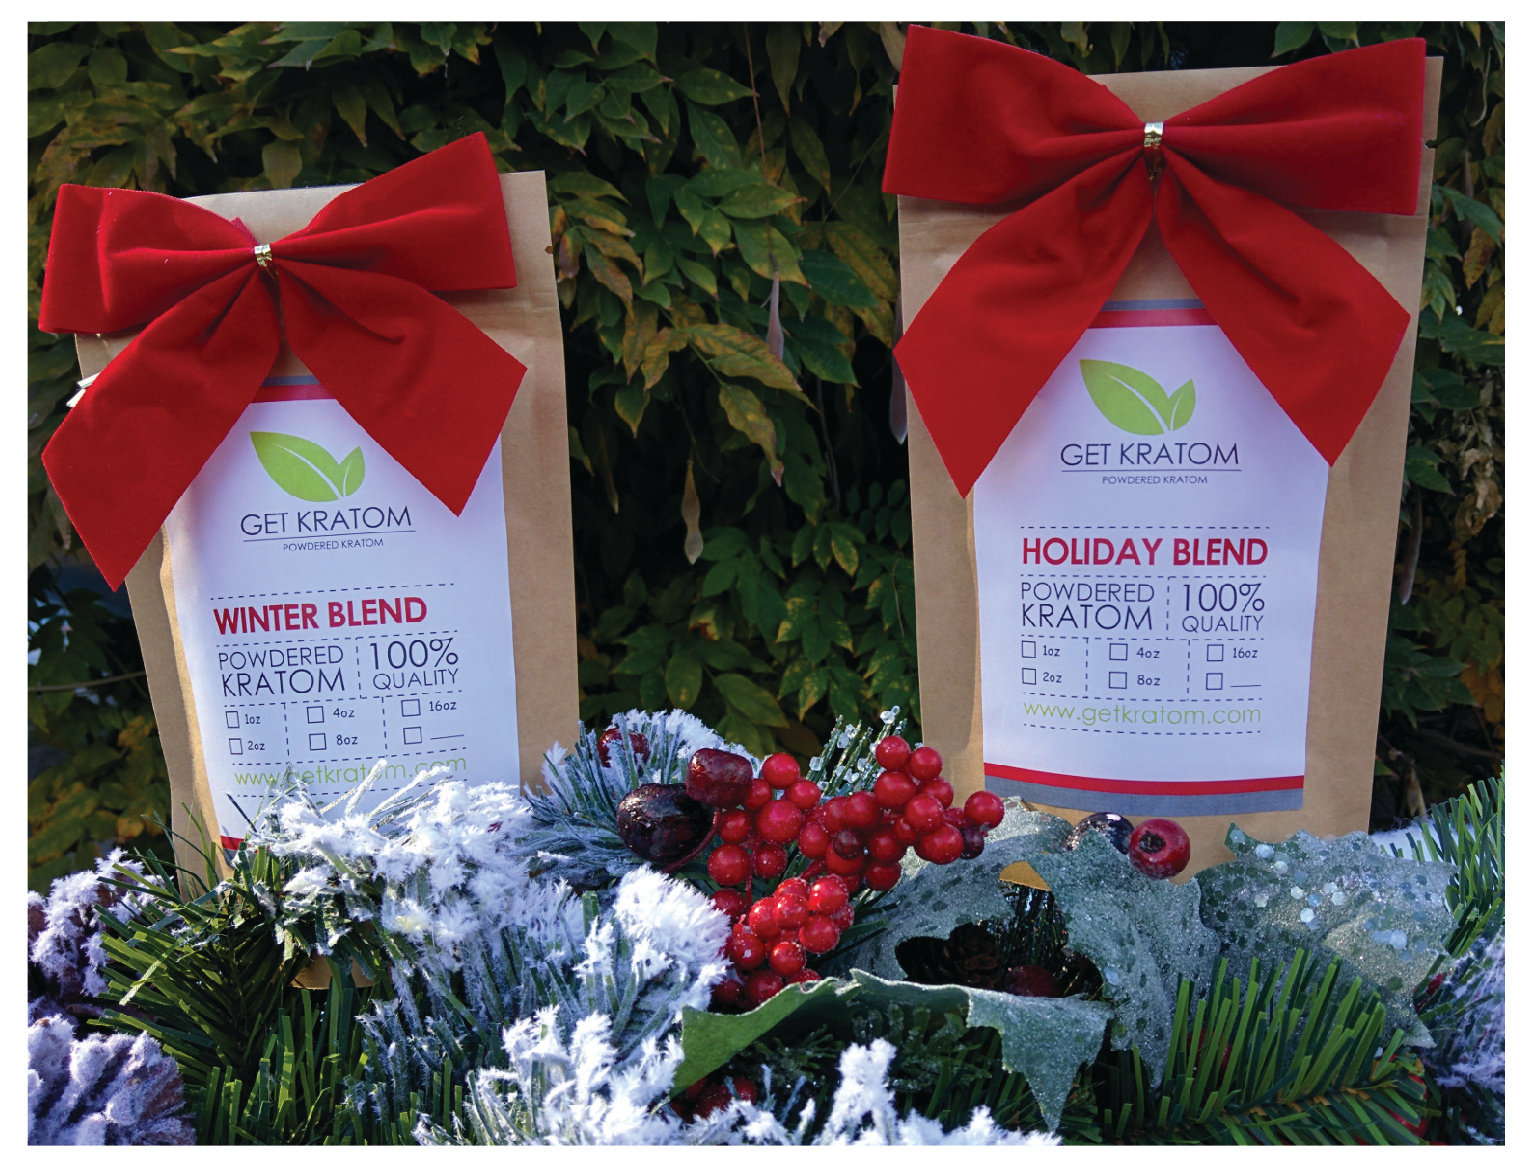 Winter Blend and Holiday Blend